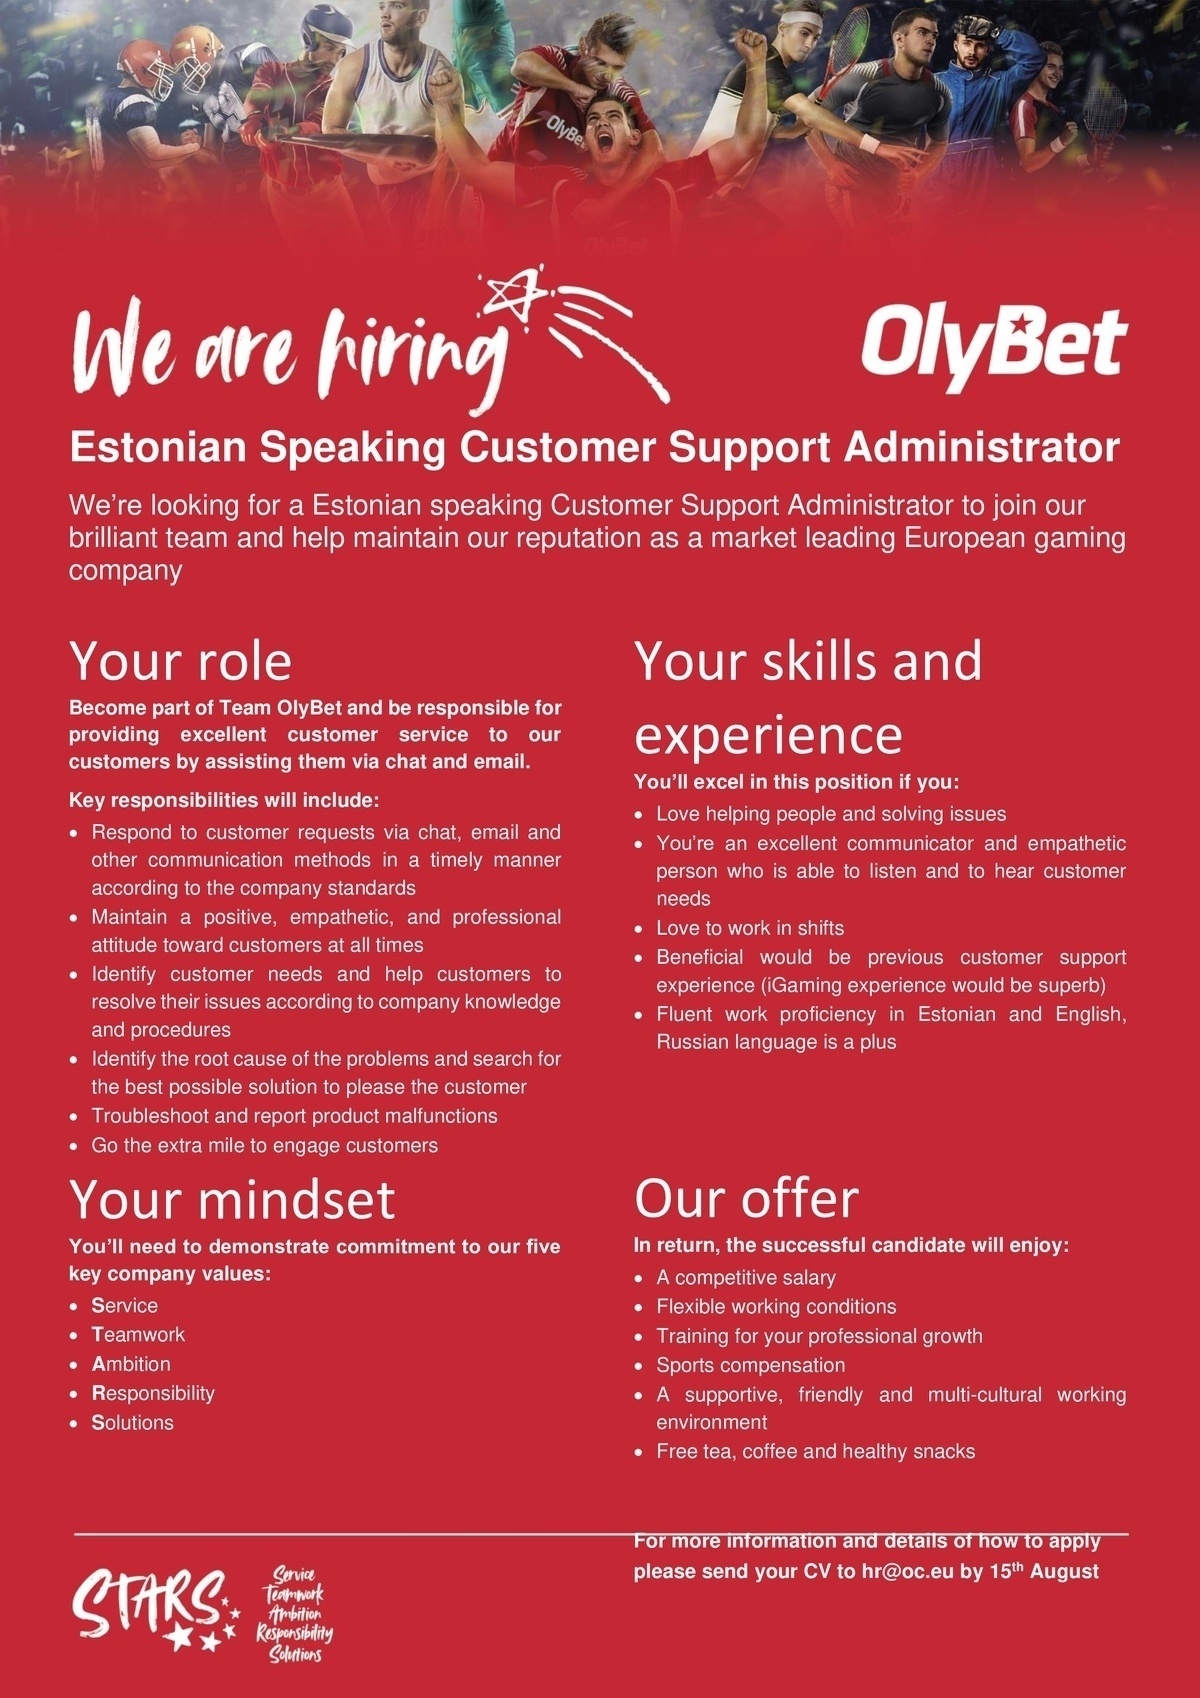 OLYMPIC ENTERTAINMENT GROUP AS Customer Support Administrator @ OlyBet